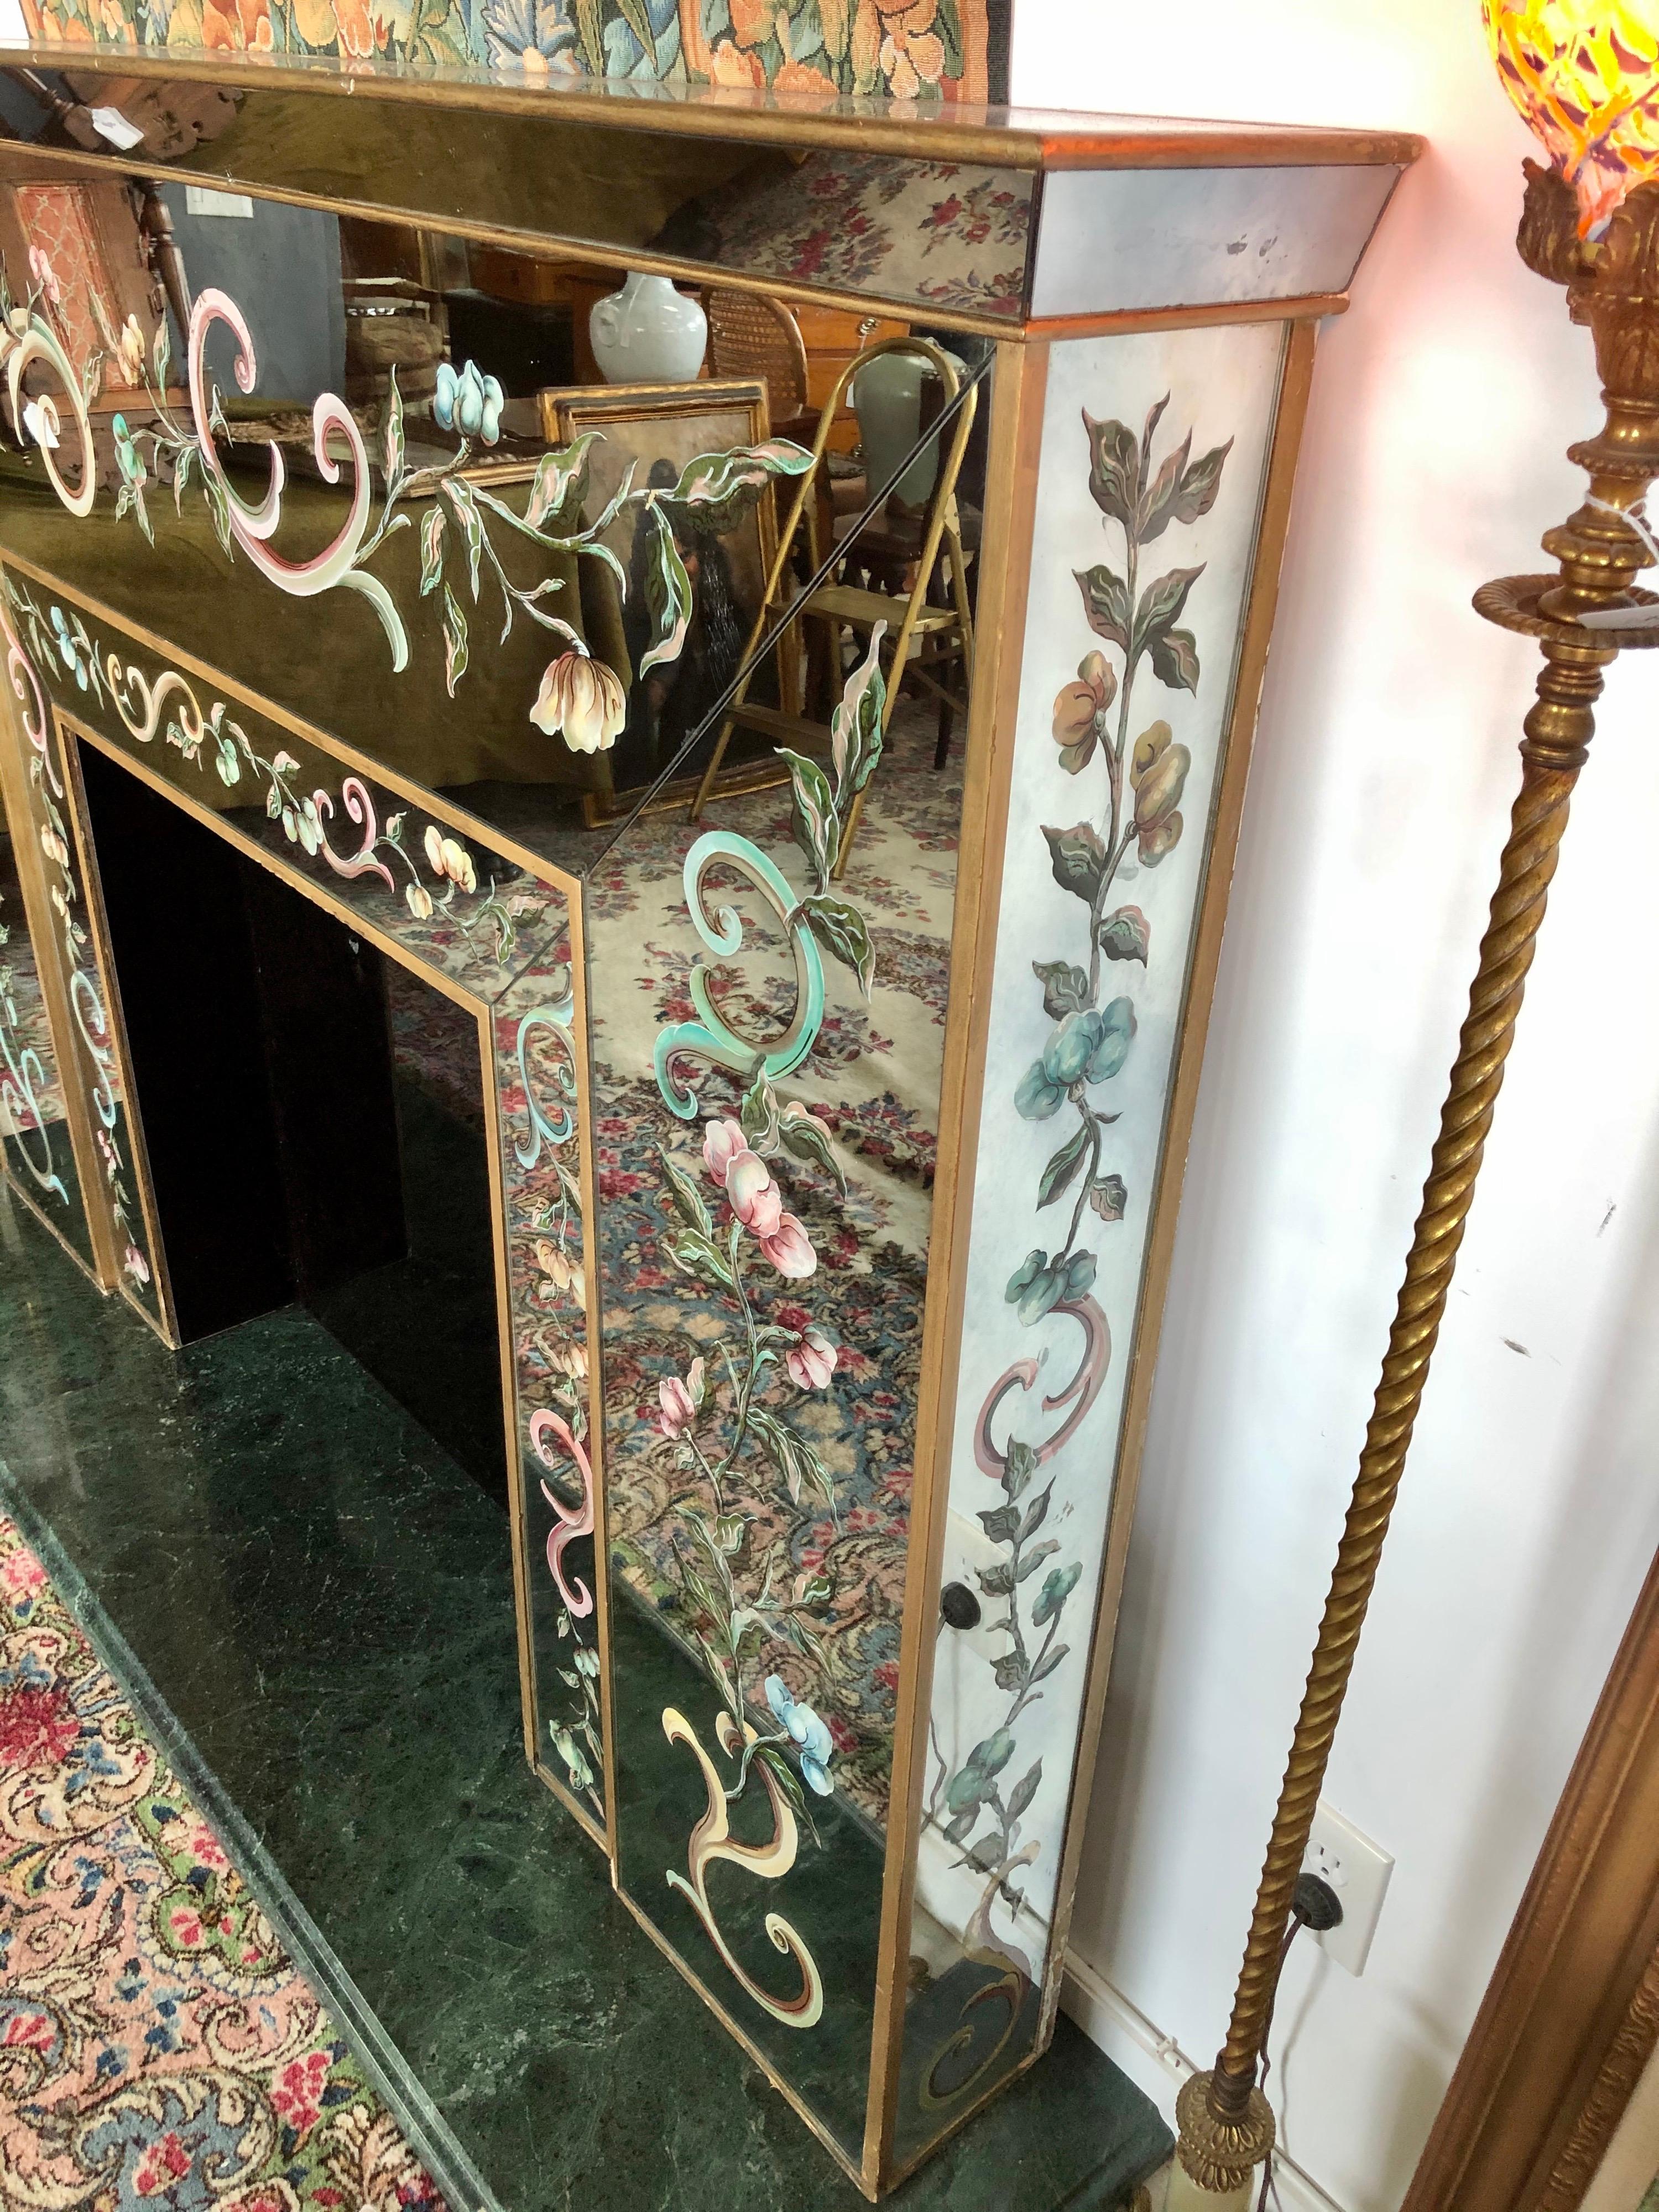 20th Century Italian Mirrored Fireplace Mantel with Floral Églomisé Decoration with Mirror